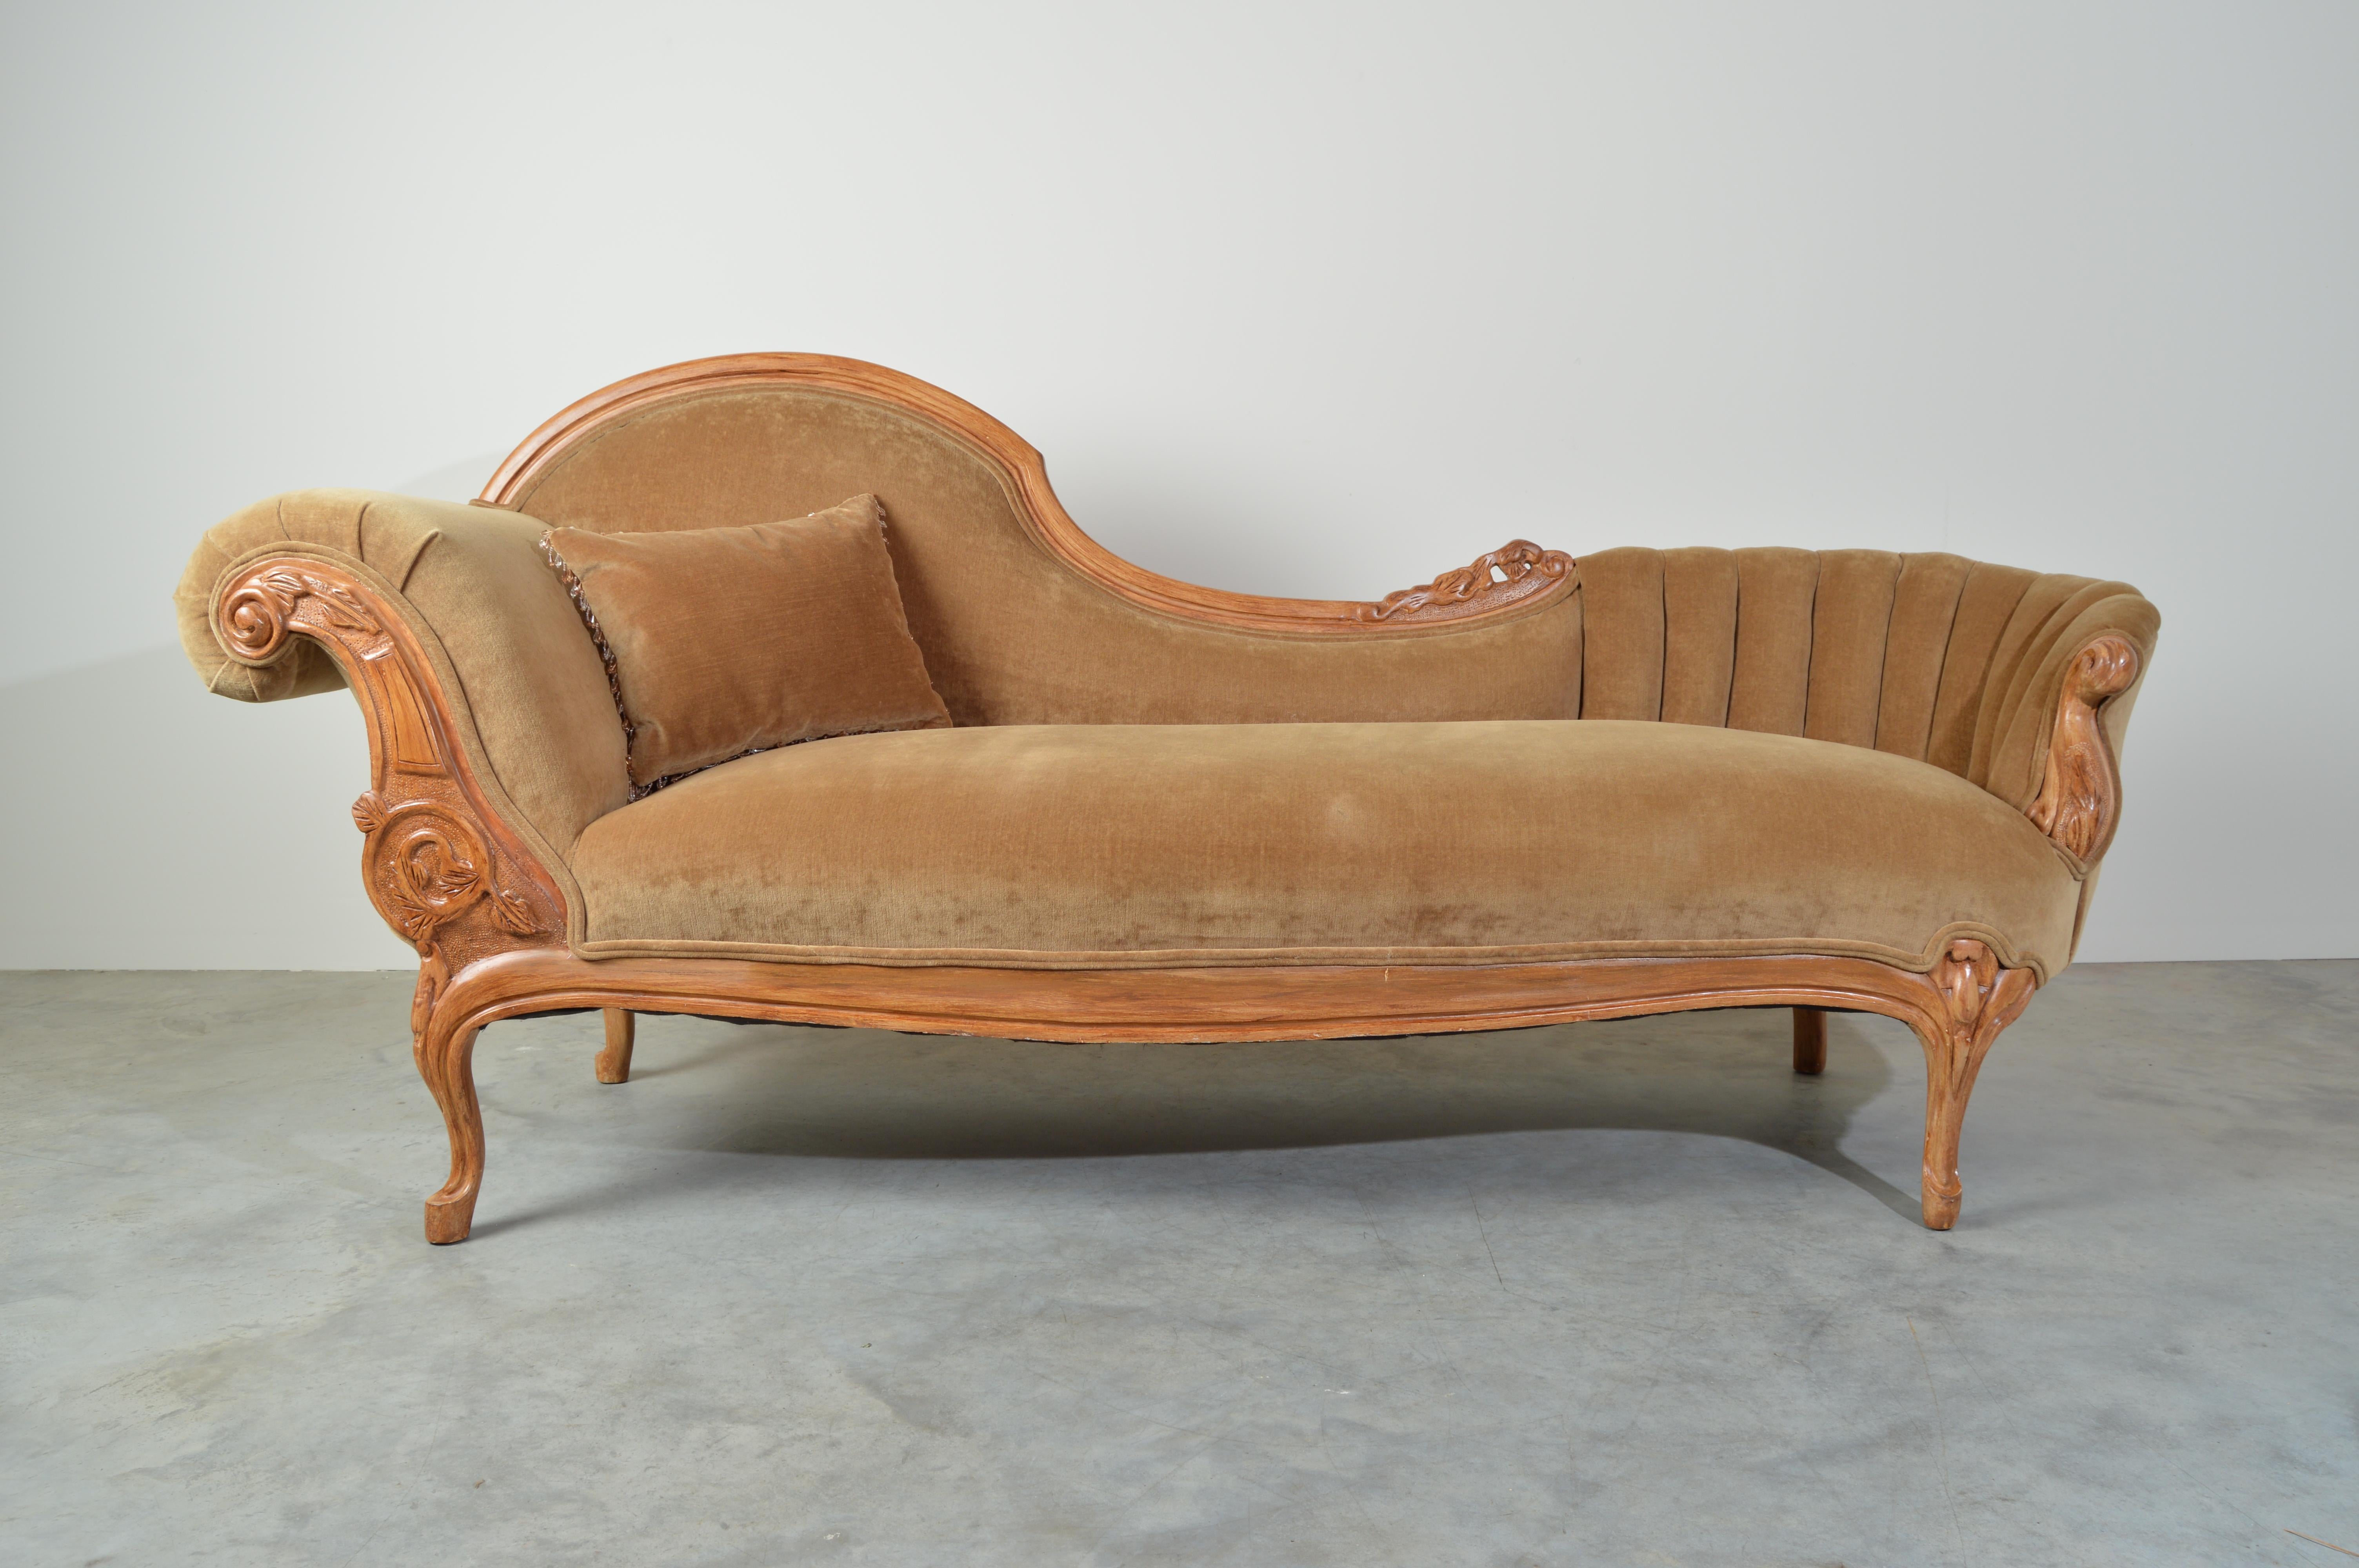 A graceful hand carved French Meridienne sofa in the Louis XV style having fresh velvet upholstery with new cushioning throughout. Very solid construction.

Measures: Height shorter side-27.5